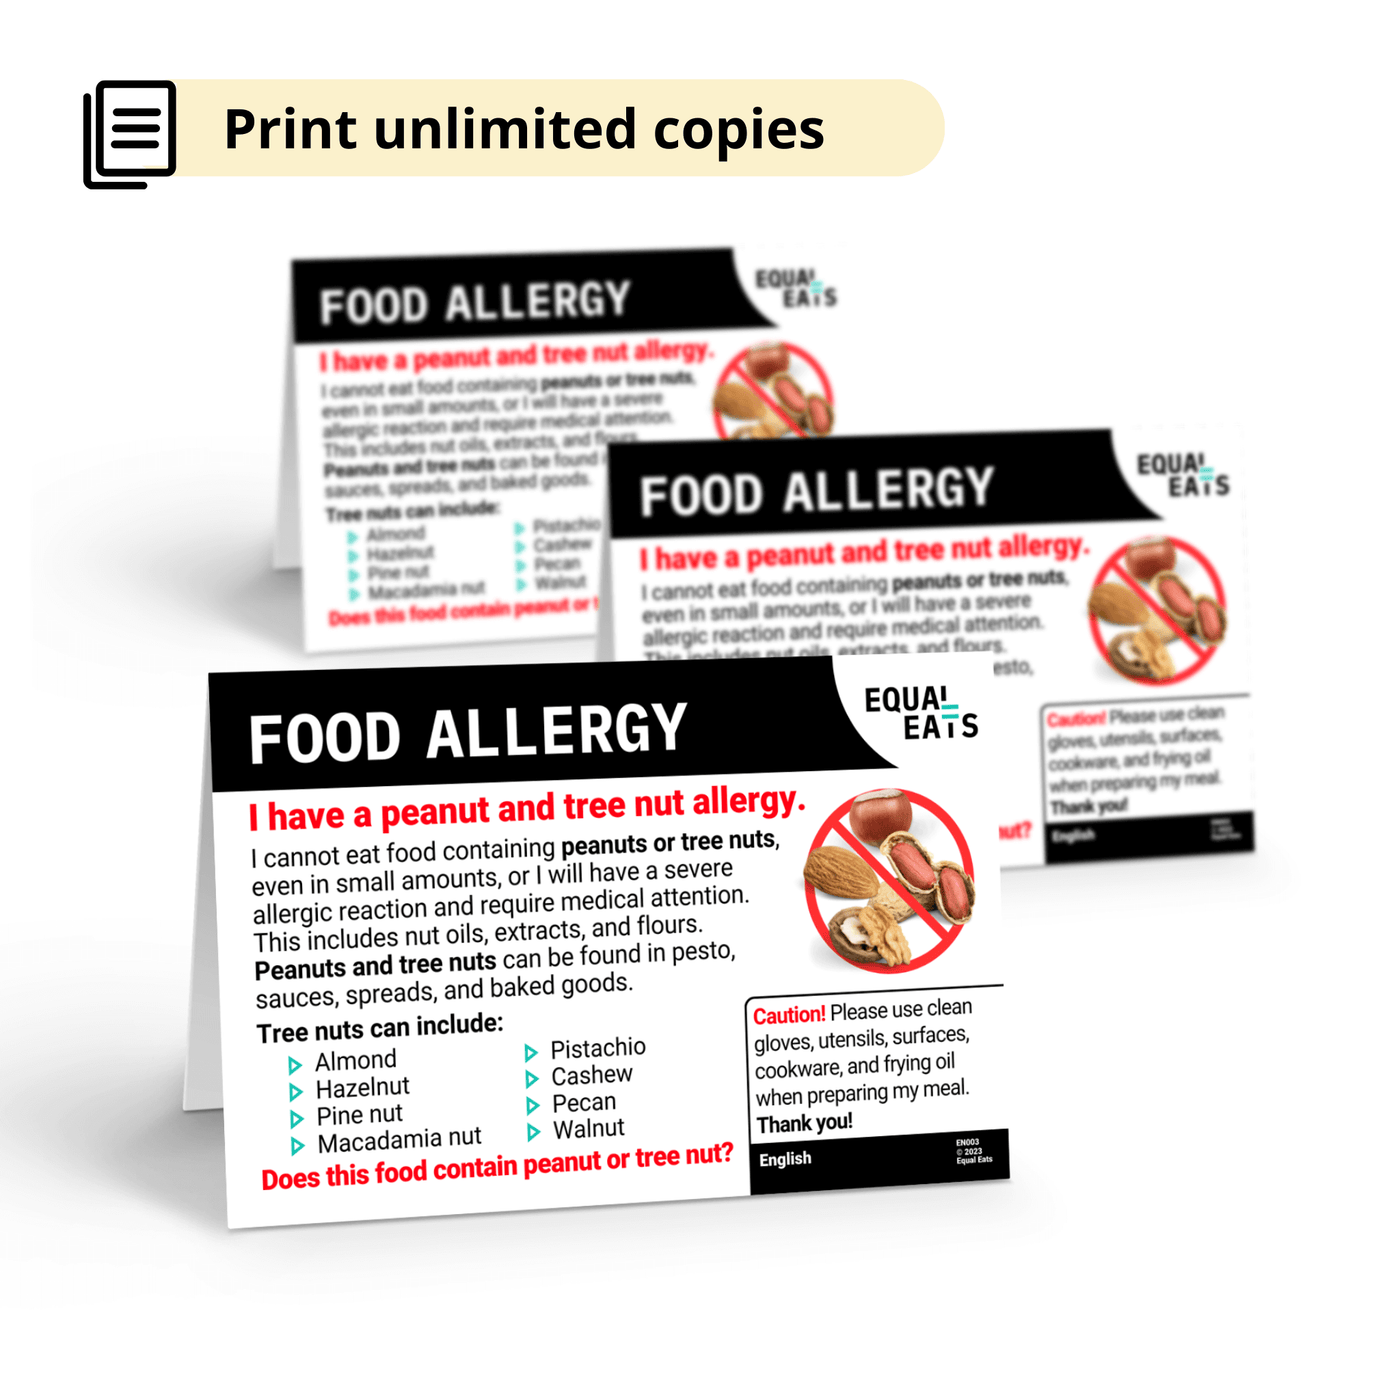 Printable Peanut and Tree Nut Allergy Card in Hebrew